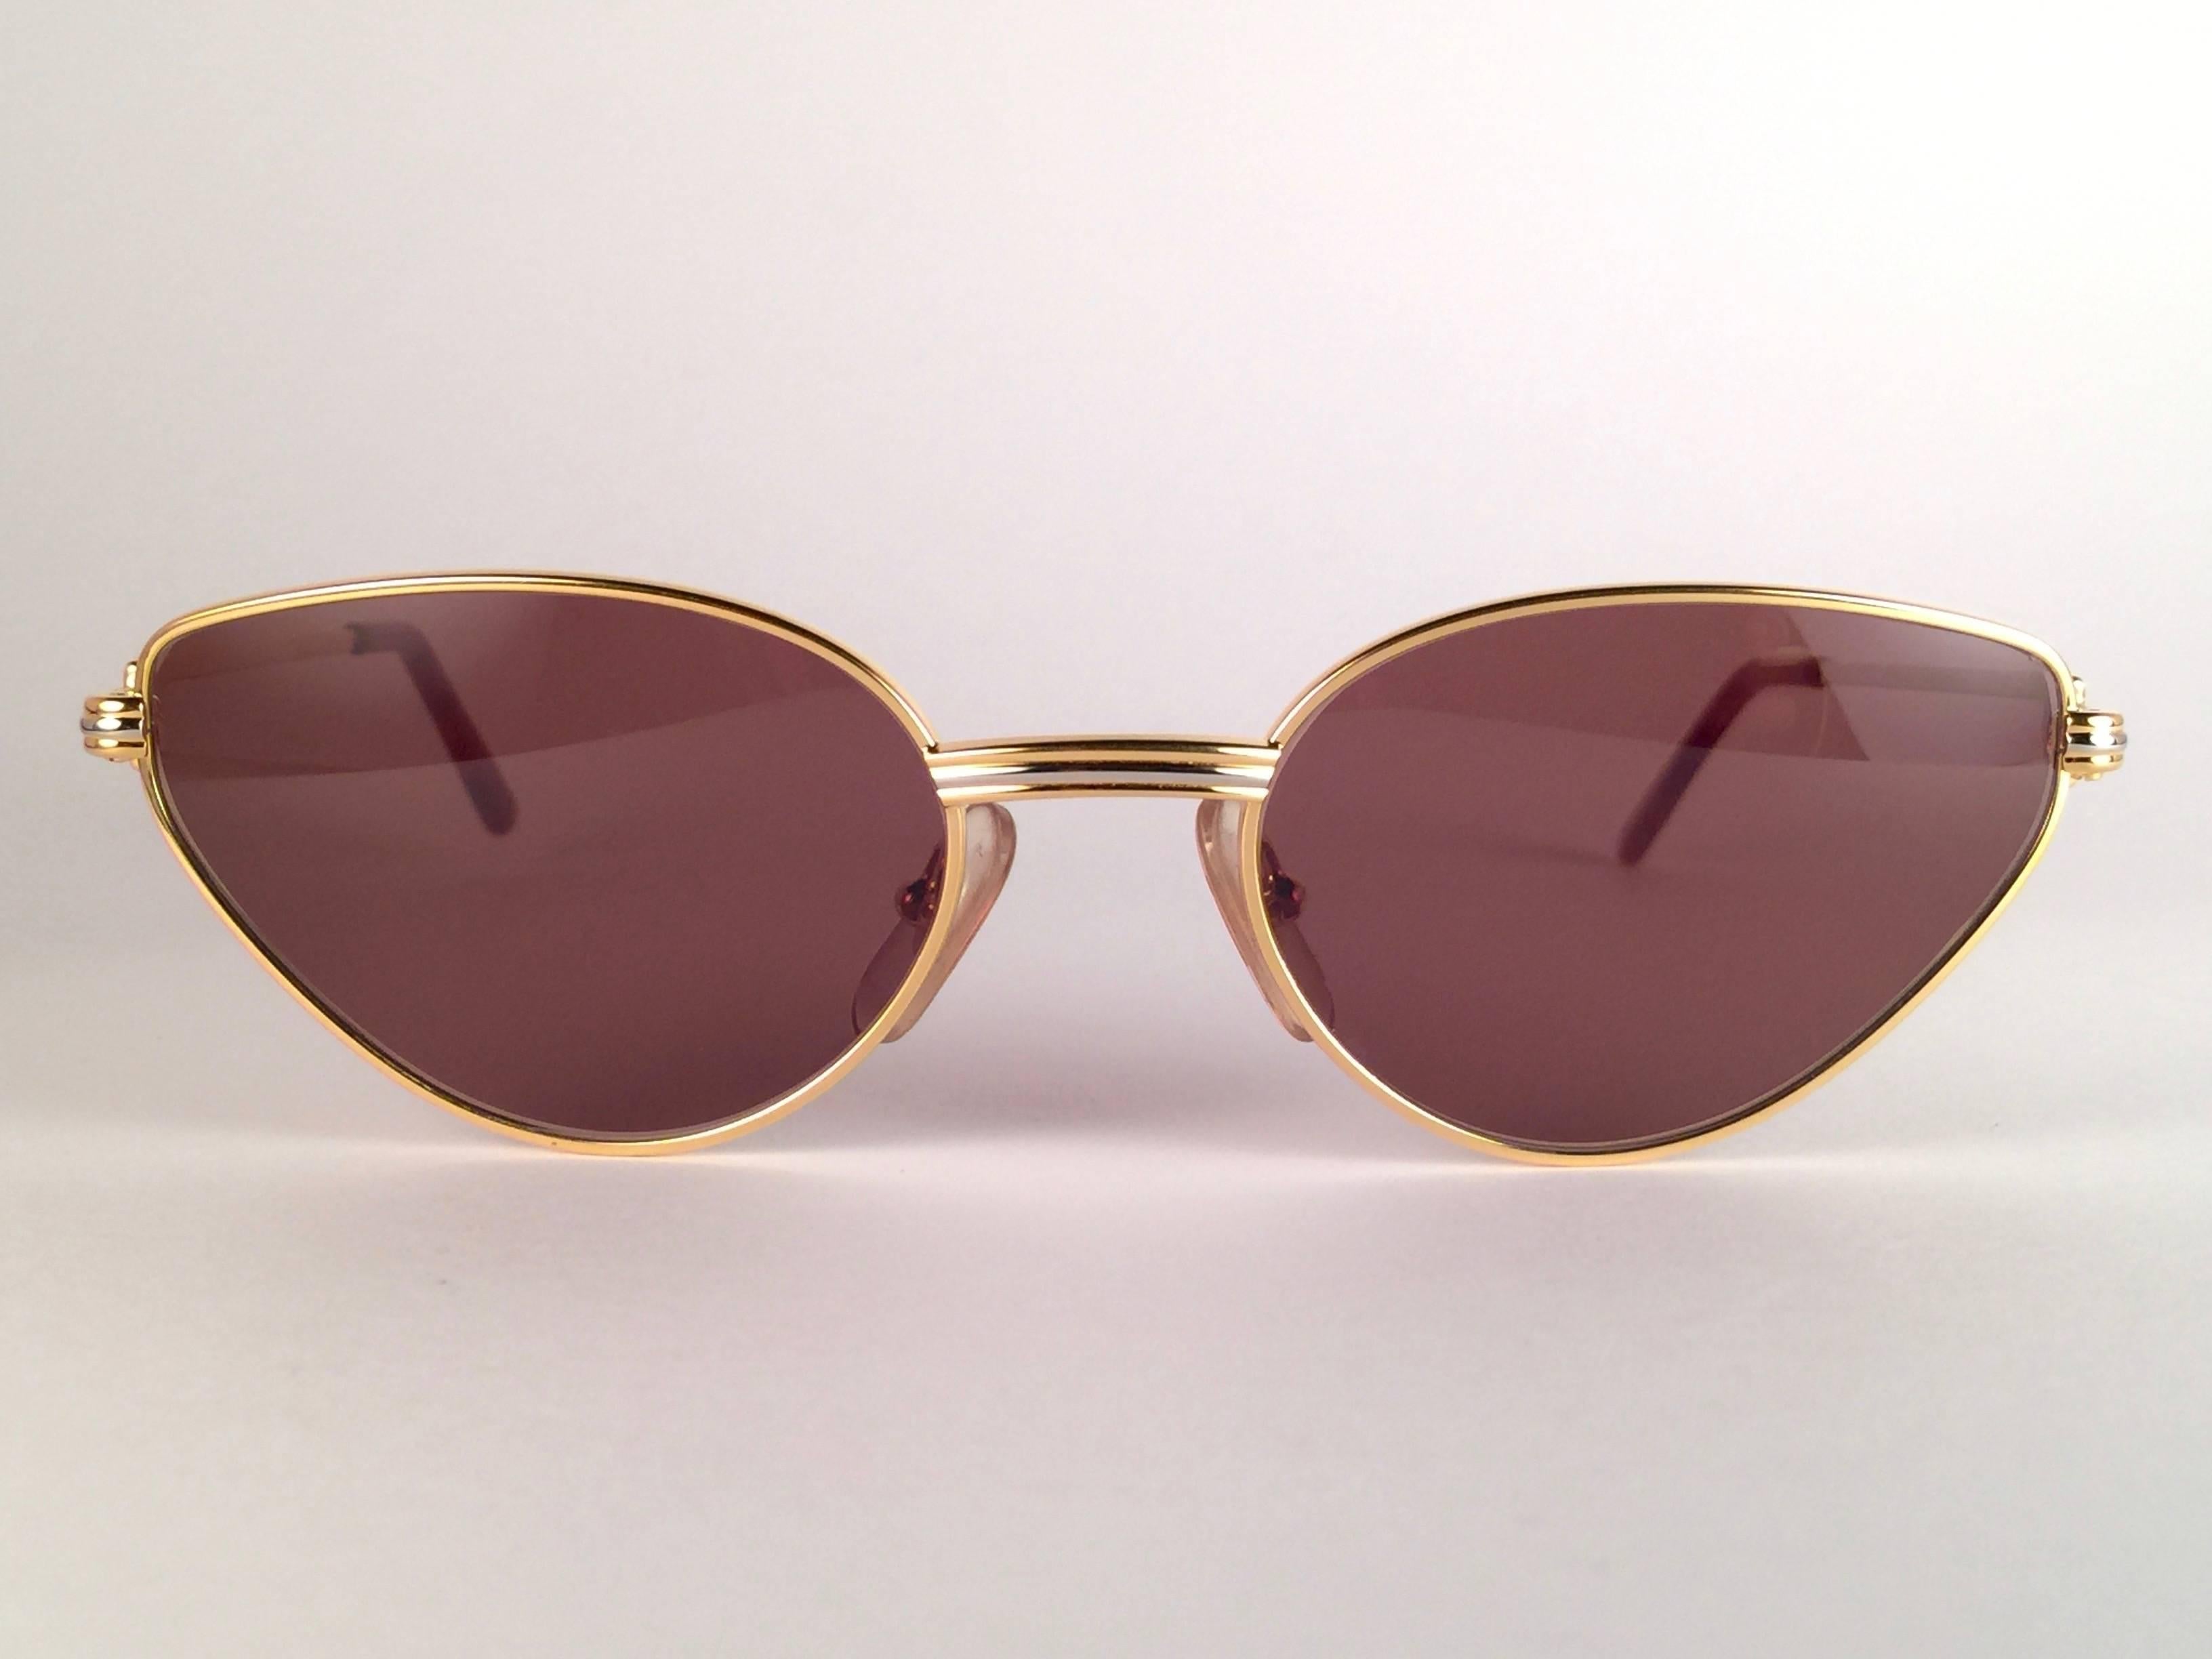 New Cartier Rivoli Vendome 54mm Cat Eye Sunglasses 18k Heavy Plated France In New Condition For Sale In Baleares, Baleares